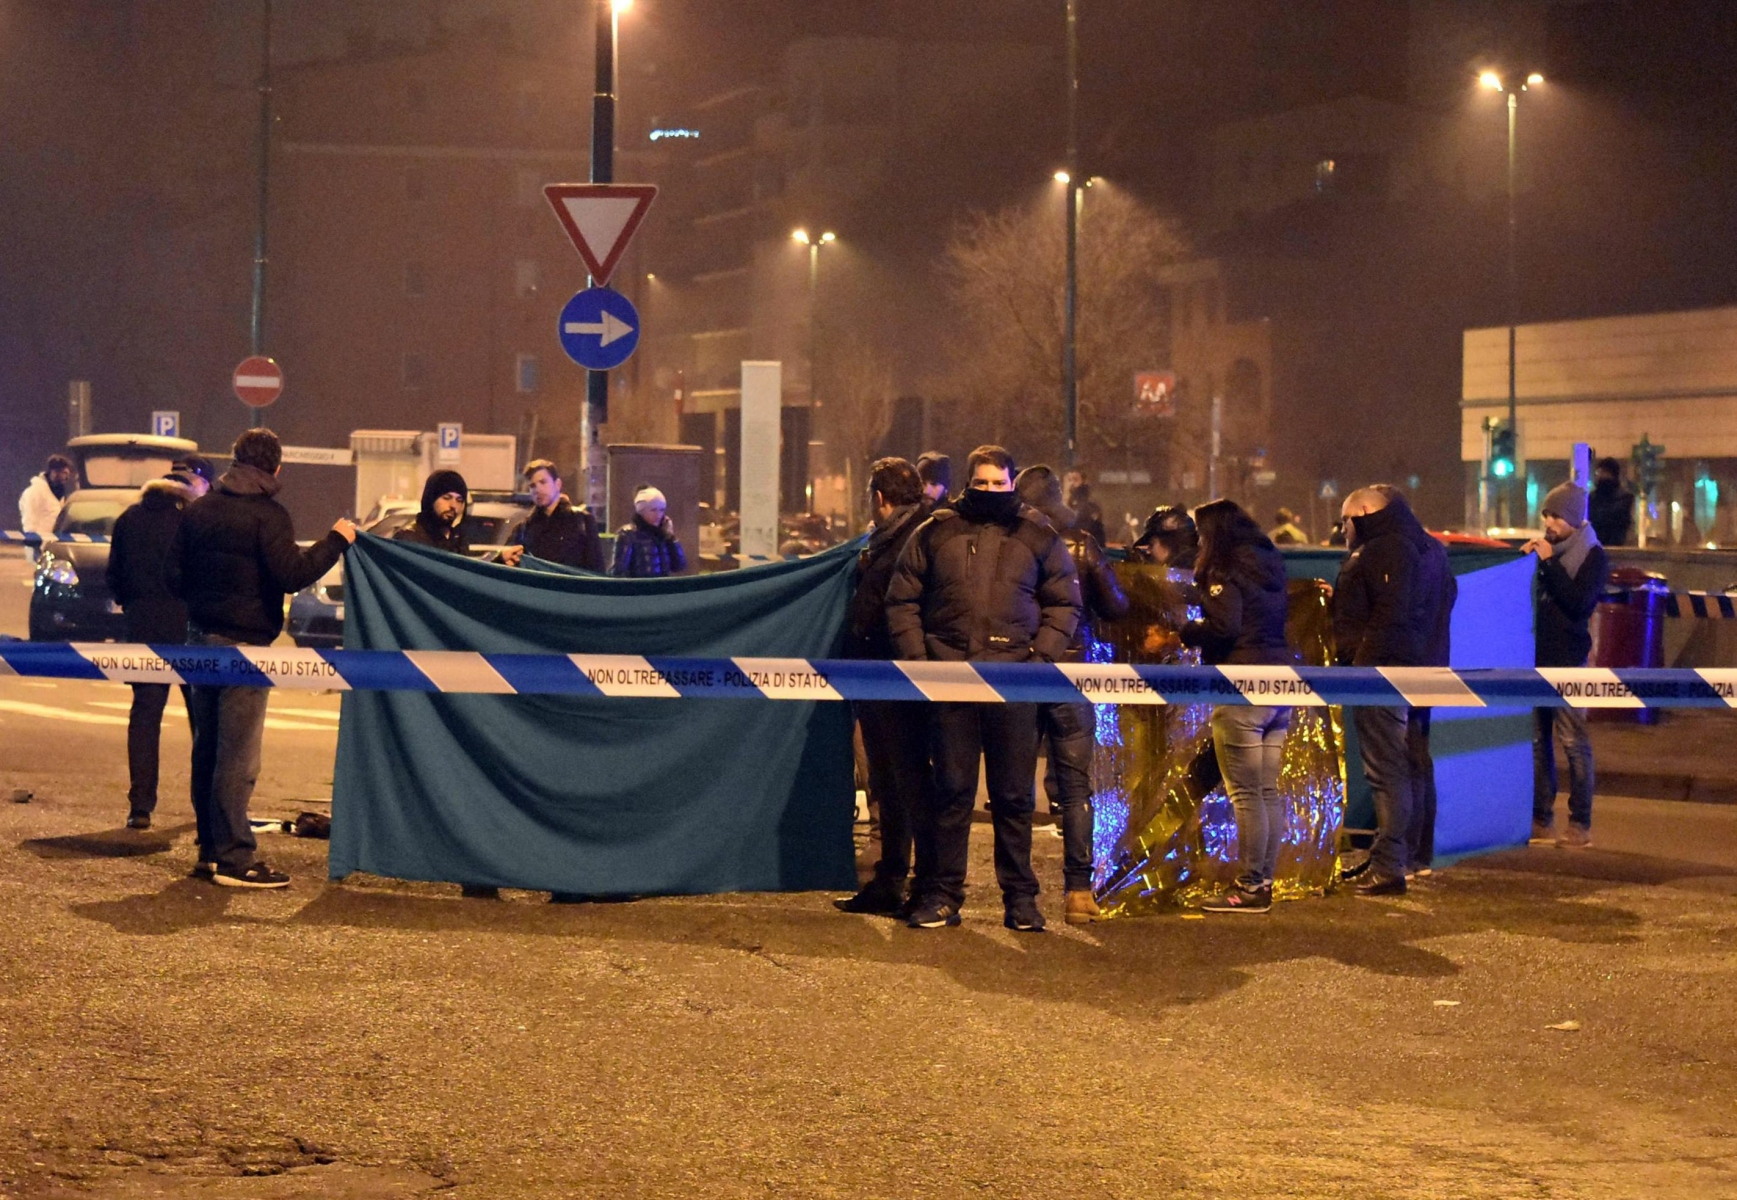 epa05686425 Italian police use blankets to prevent a direct view of a dead body at the sealed off scene of a shootout between police and a man in Milan's Sesto San Giovanni neighborhood, early 23 December 2016. Italy's Interior Minister Marco Minitti meanwhile has confirmed that the identity of the individual shot dead after a gunfight with Italian police this morning near Milan is Anis Amri, the 24 year old Tunisian suspected of the 19 December Berlin Christmas Market terrorist truck attack, that left at least 12 people dead and around 50 others injured.  EPA/DANIELE BENNATI ITALY BERLIN CHRISTMAS MARKET ATTACK